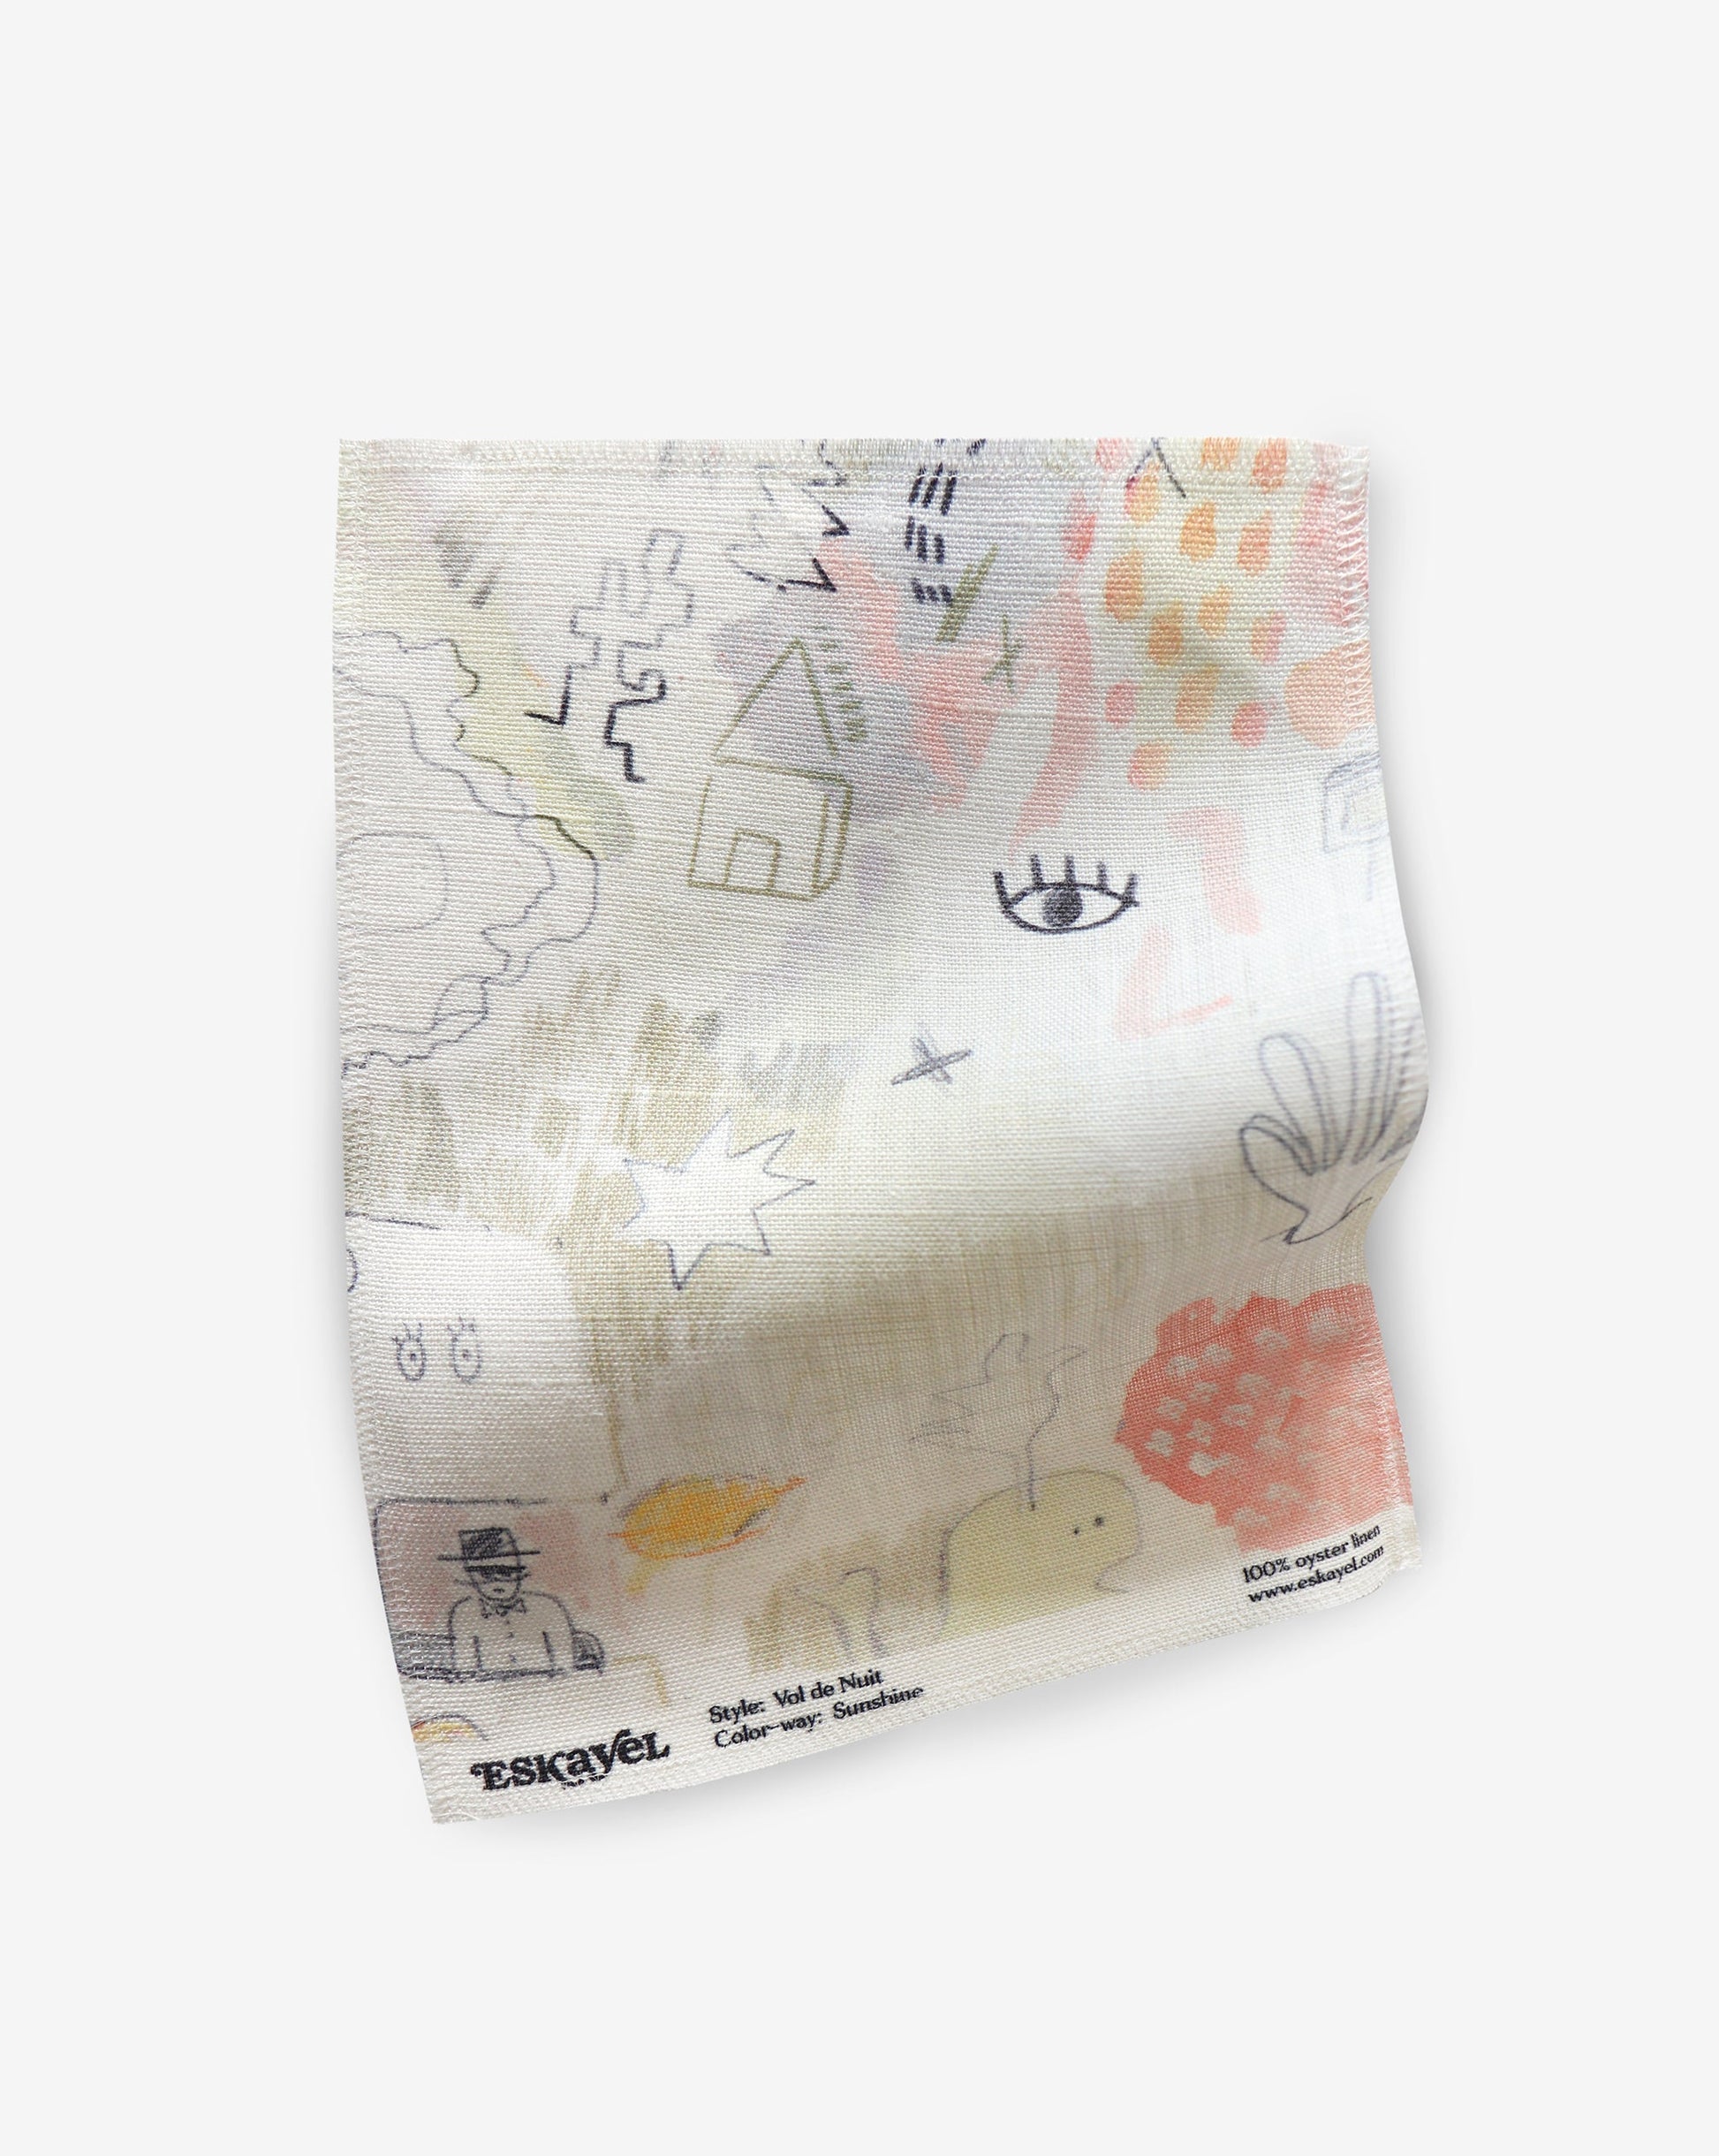 A Vol de Nuit Fabric Sunshine napkin with a drawing on it made from luxury fabric